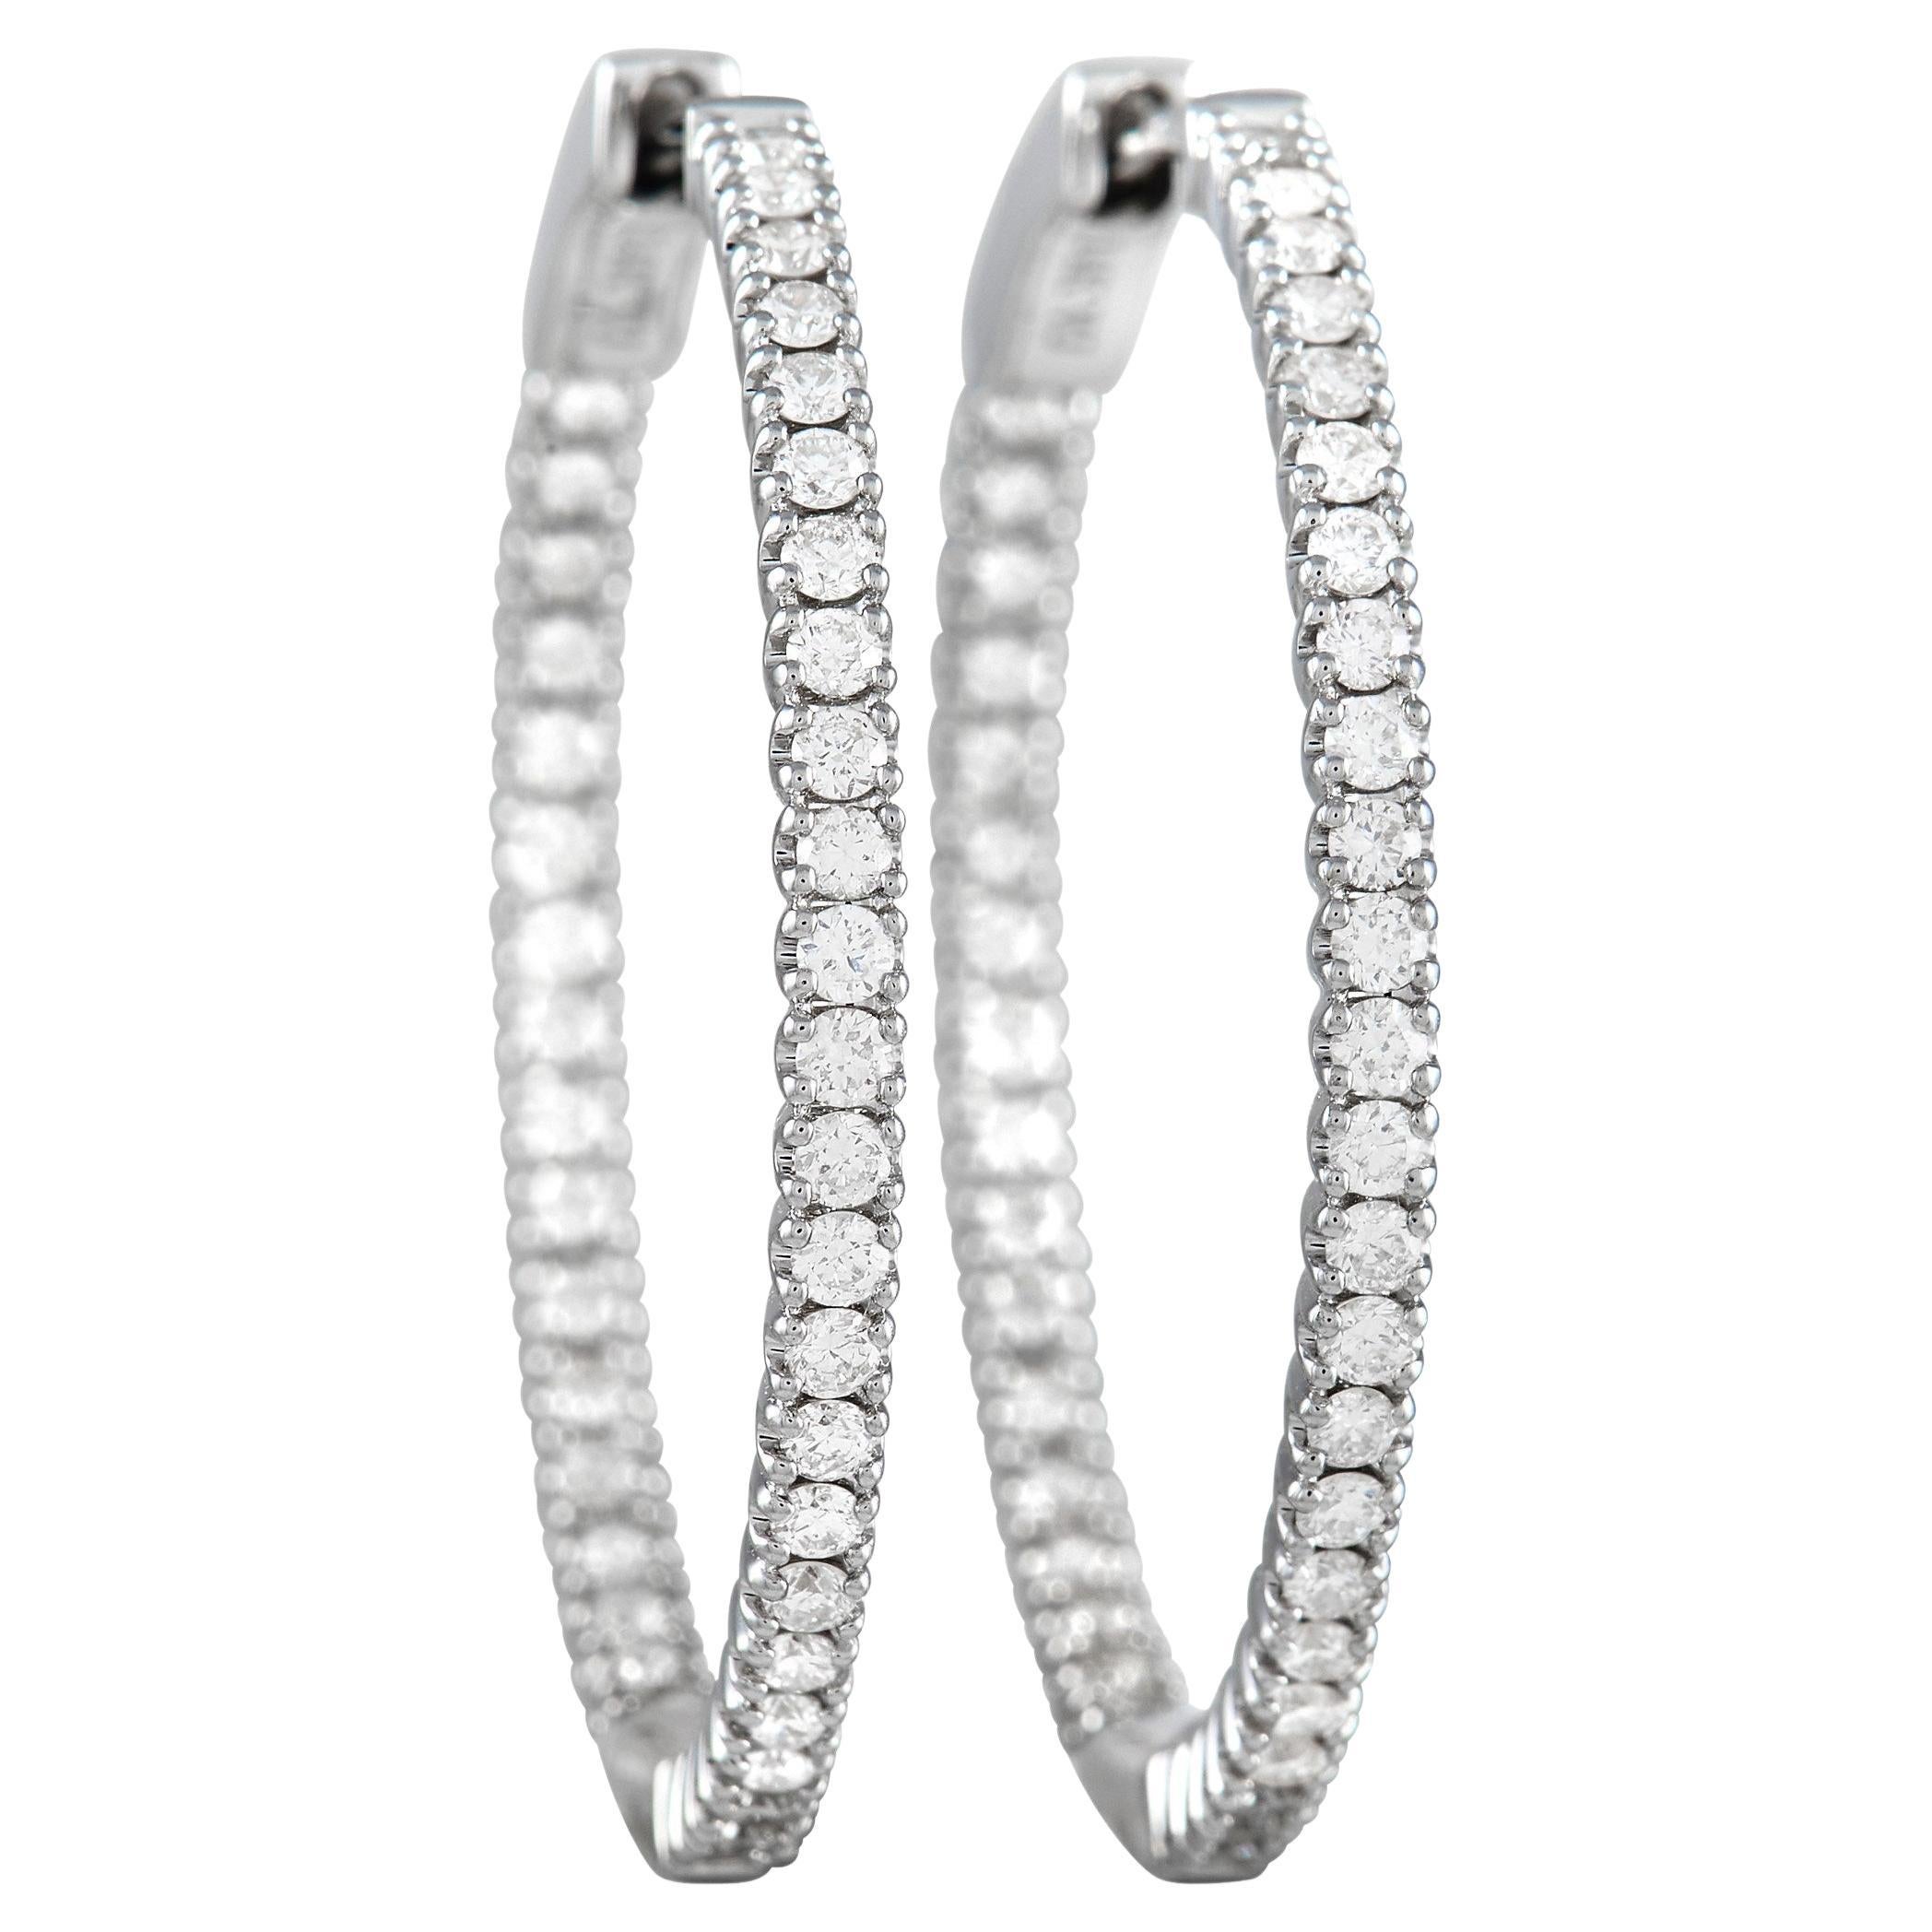 LB Exclusive 14K White Gold 0.98 ct Diamond Inside-Out Hoop Earrings For Sale